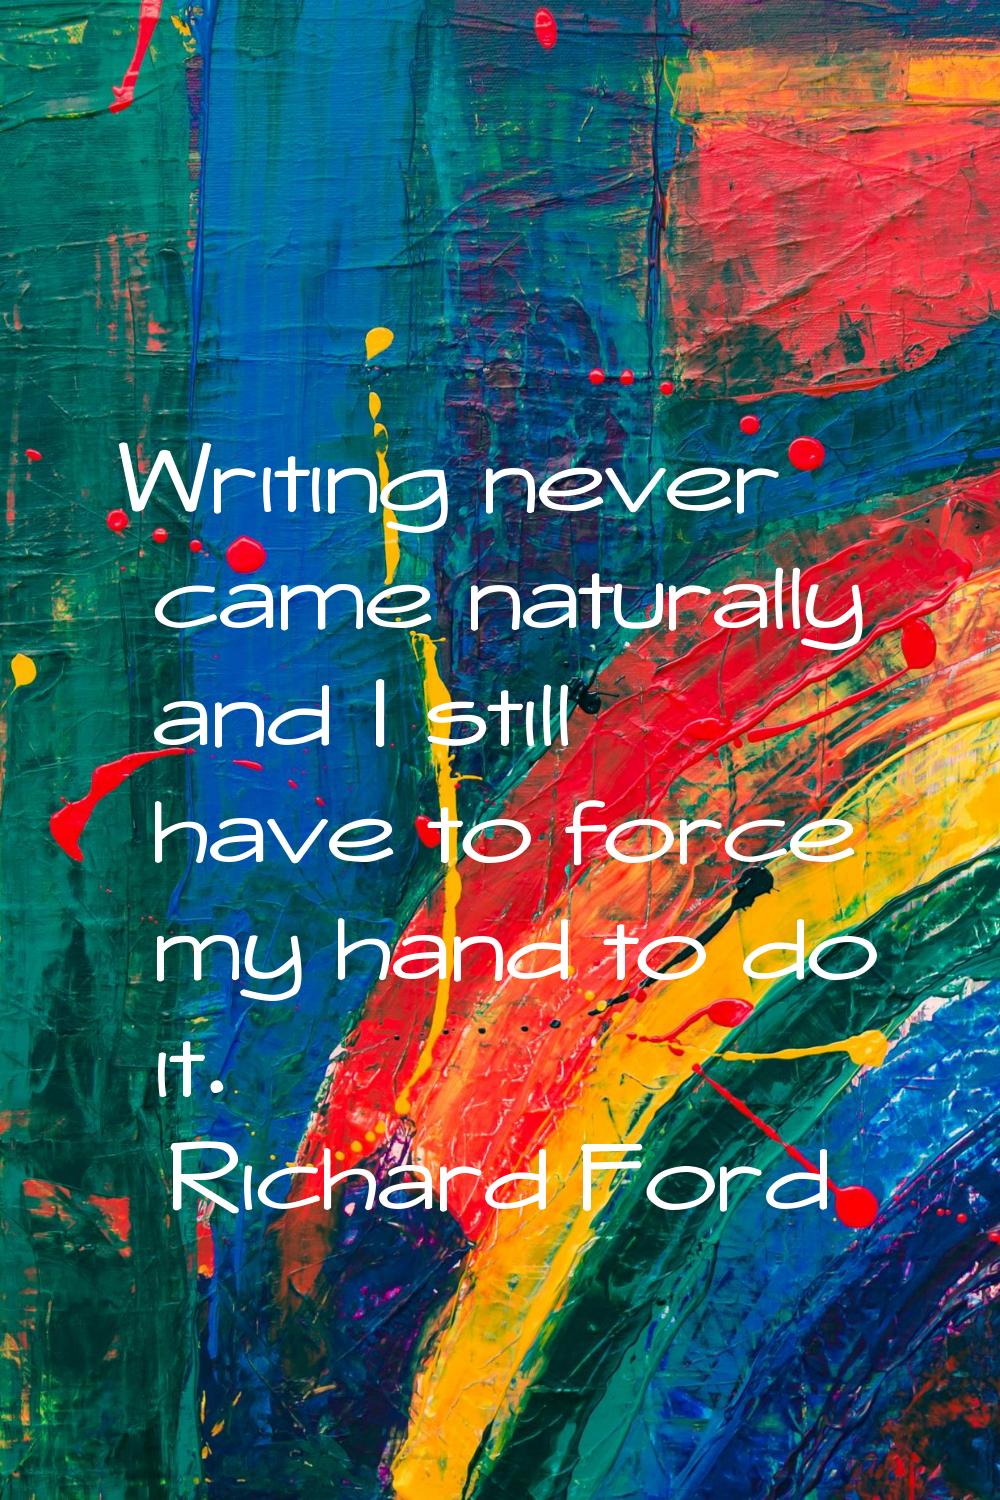 Writing never came naturally and I still have to force my hand to do it.